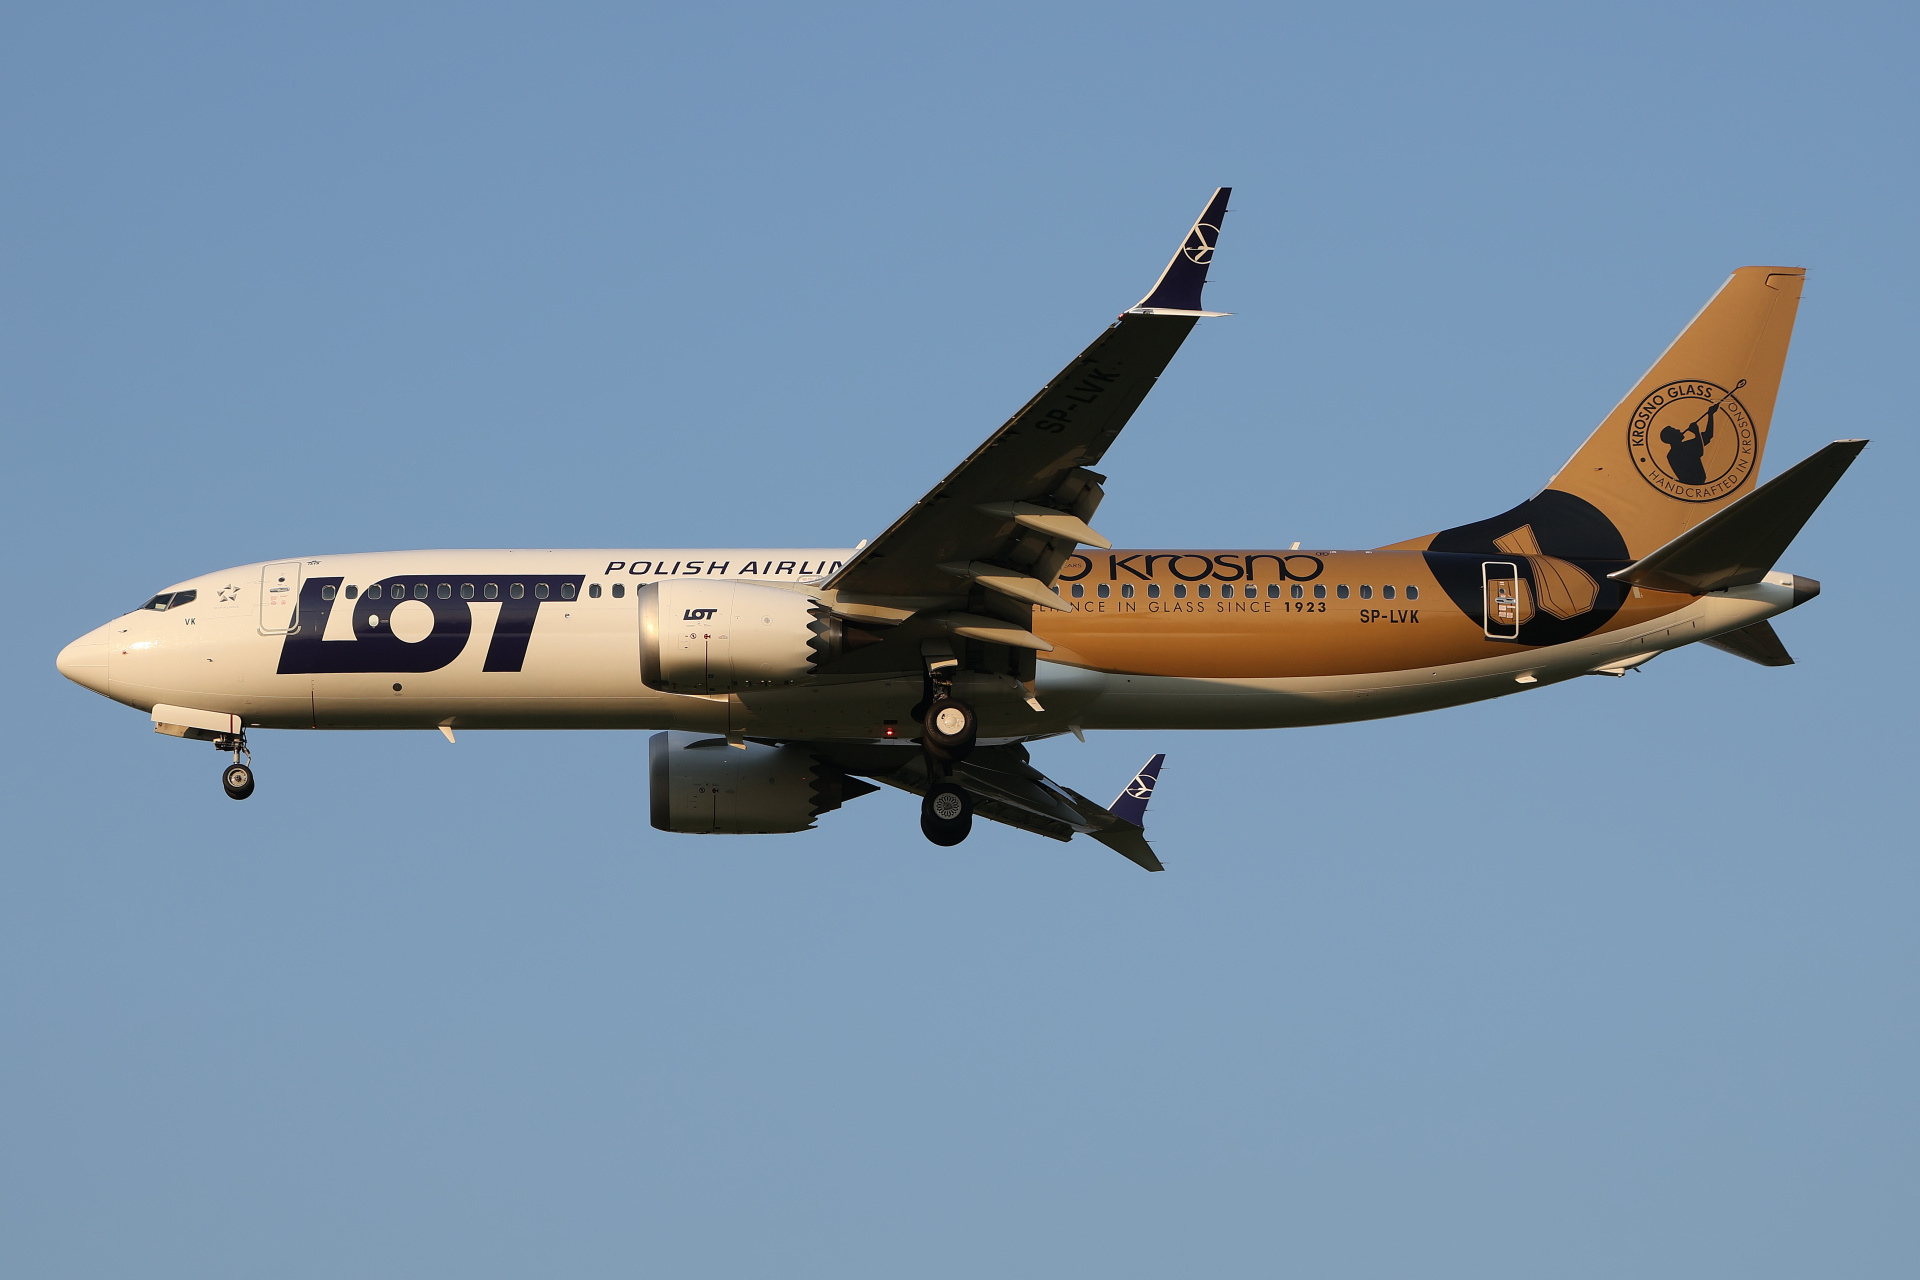 SP-LVK (100 years of Krosno Glass livery) (Aircraft » EPWA Spotting » Boeing 737-8 MAX » LOT Polish Airlines)